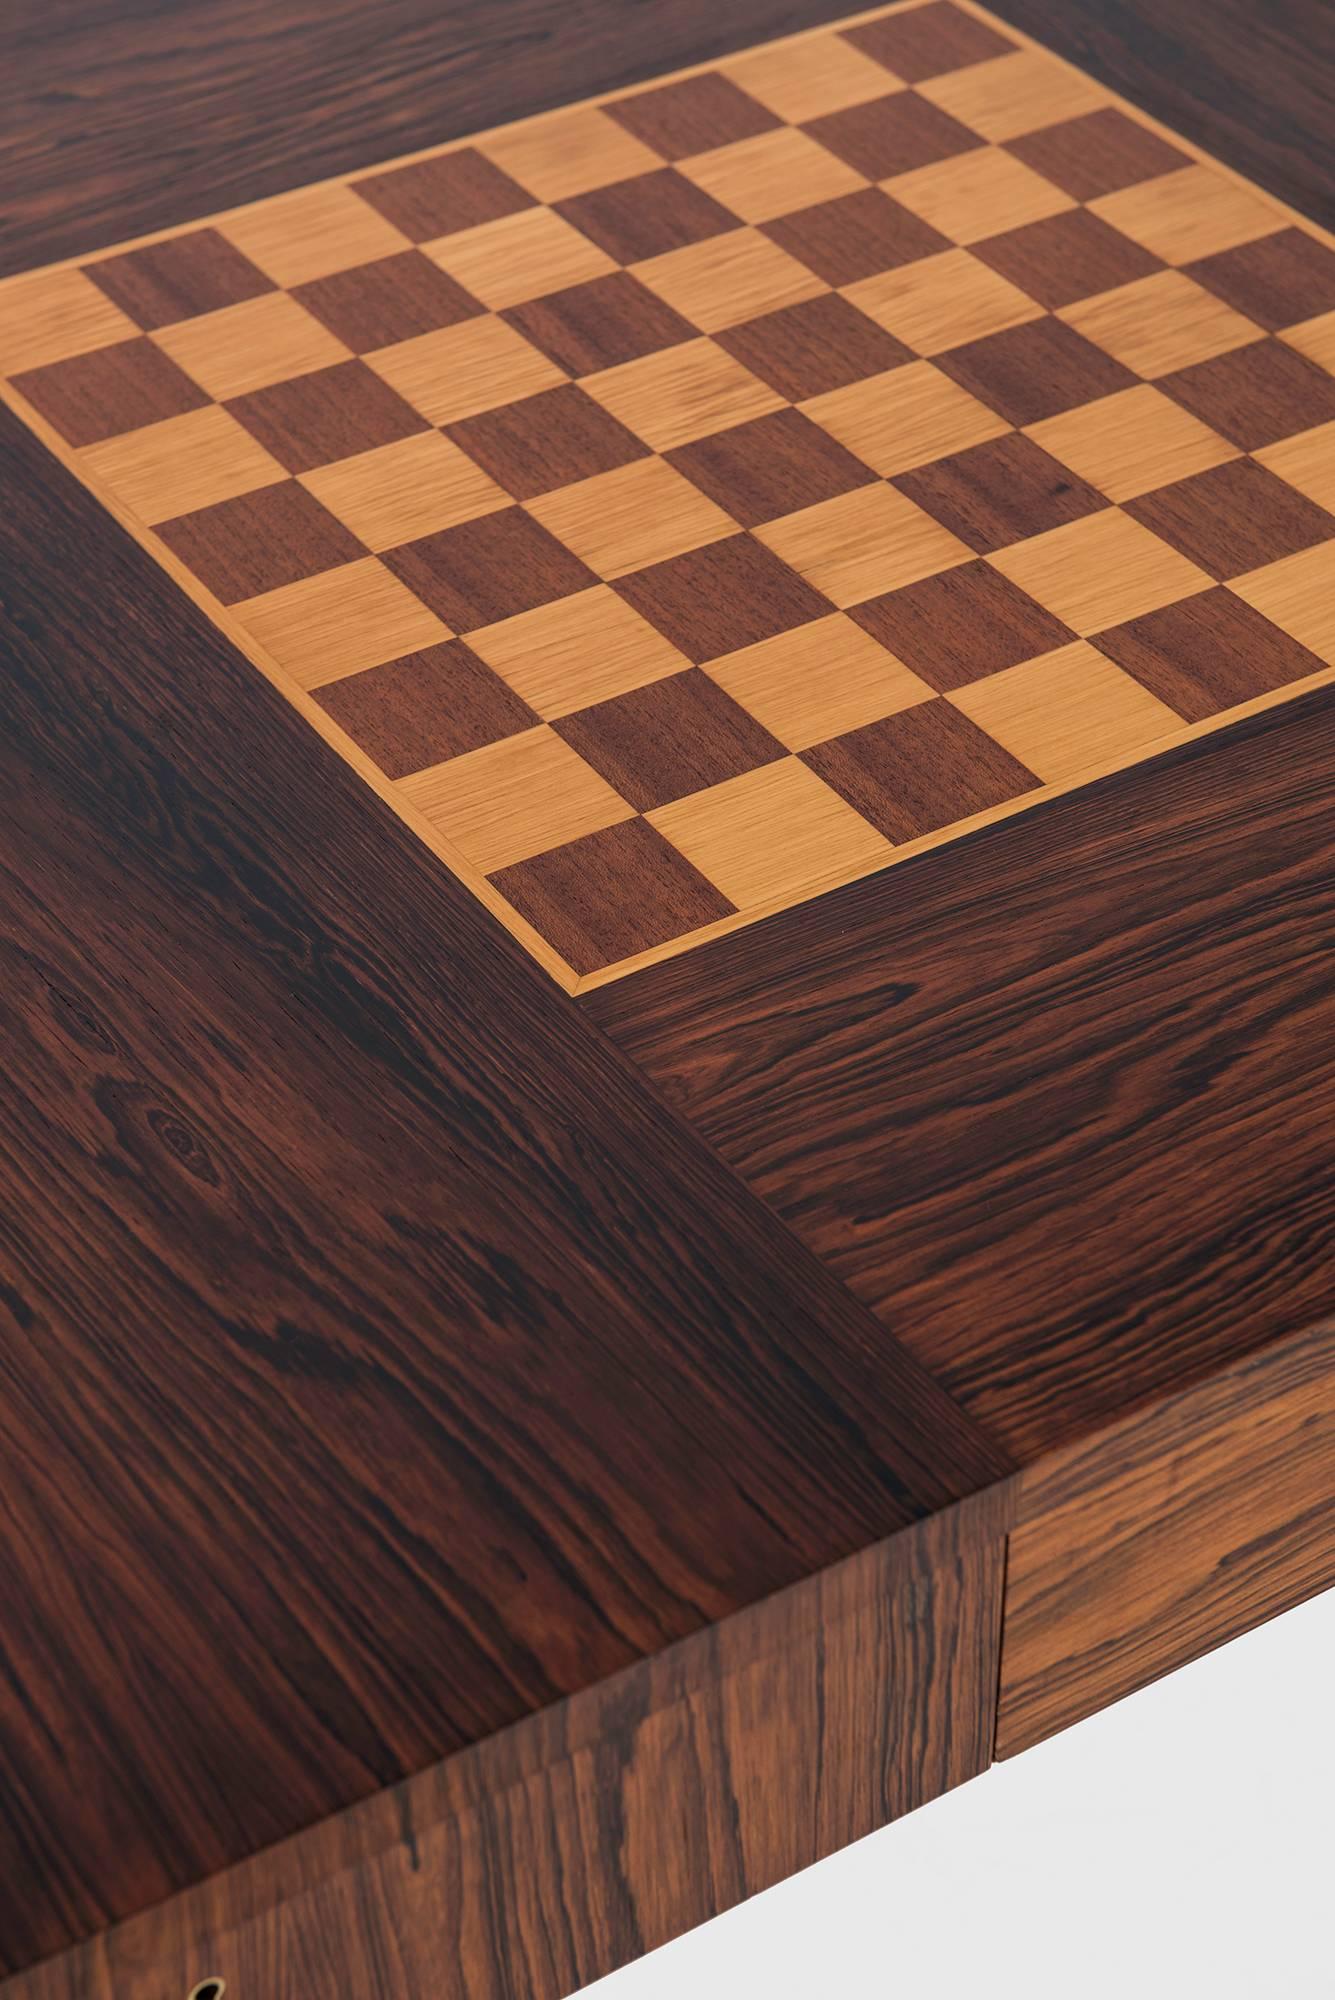 Rosewood Desk with Chessboard on Top Produced in Sweden 1